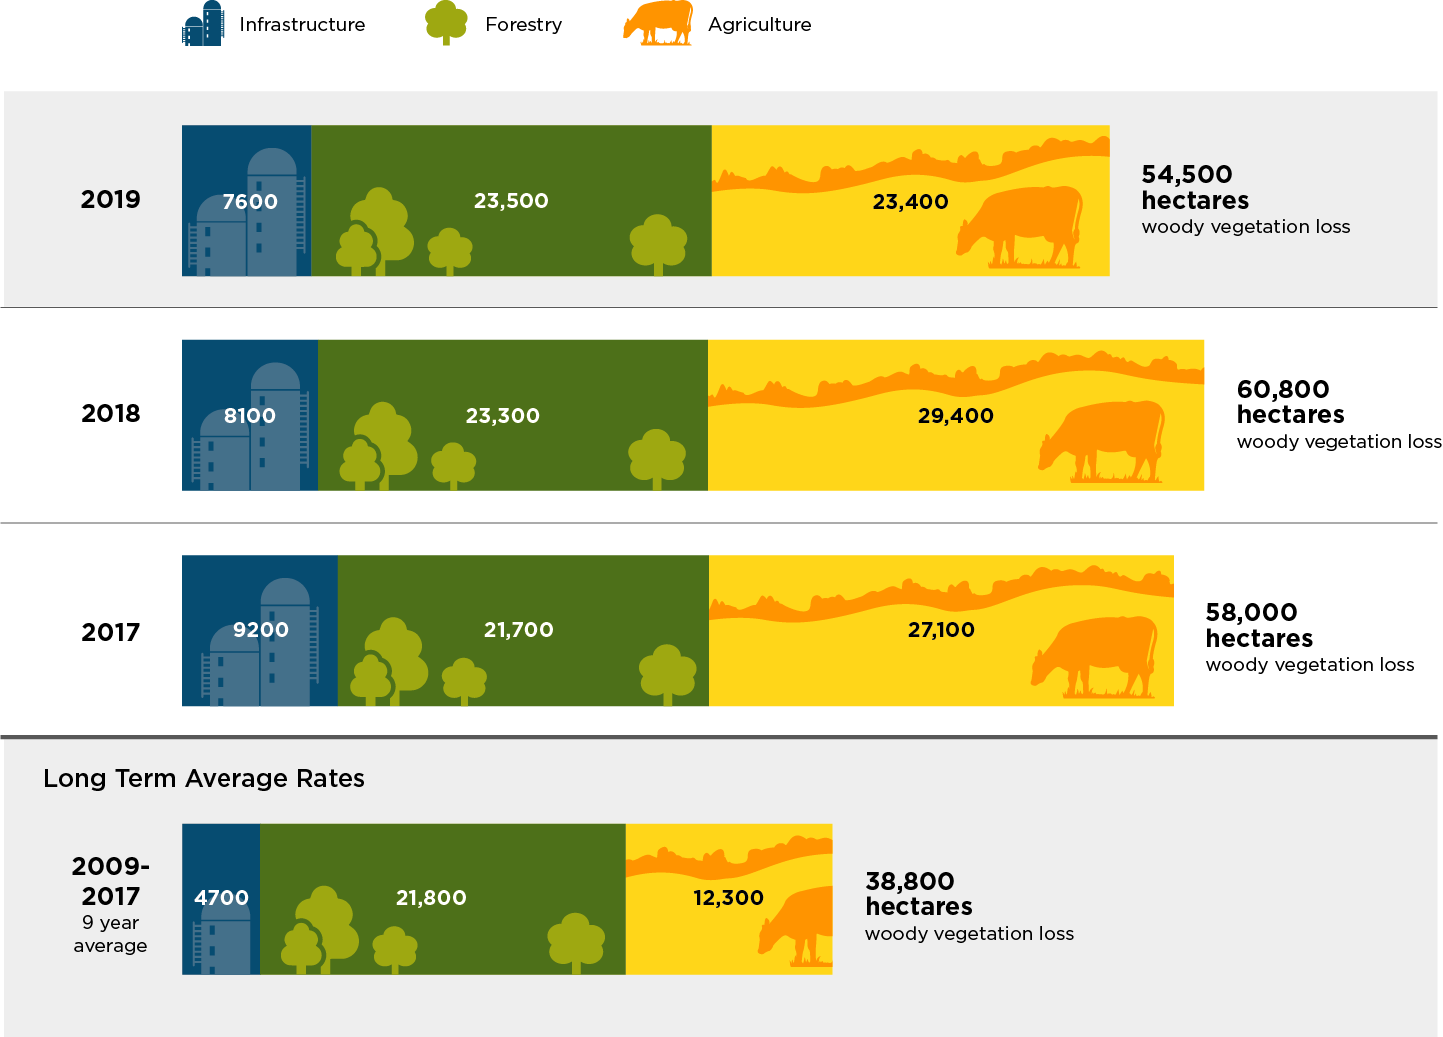 Infographic representing statewide vegetation loss in 2017, 2018 and 2019 and long term average, according to landcover classes: agriculture, forestry and infrastructure.